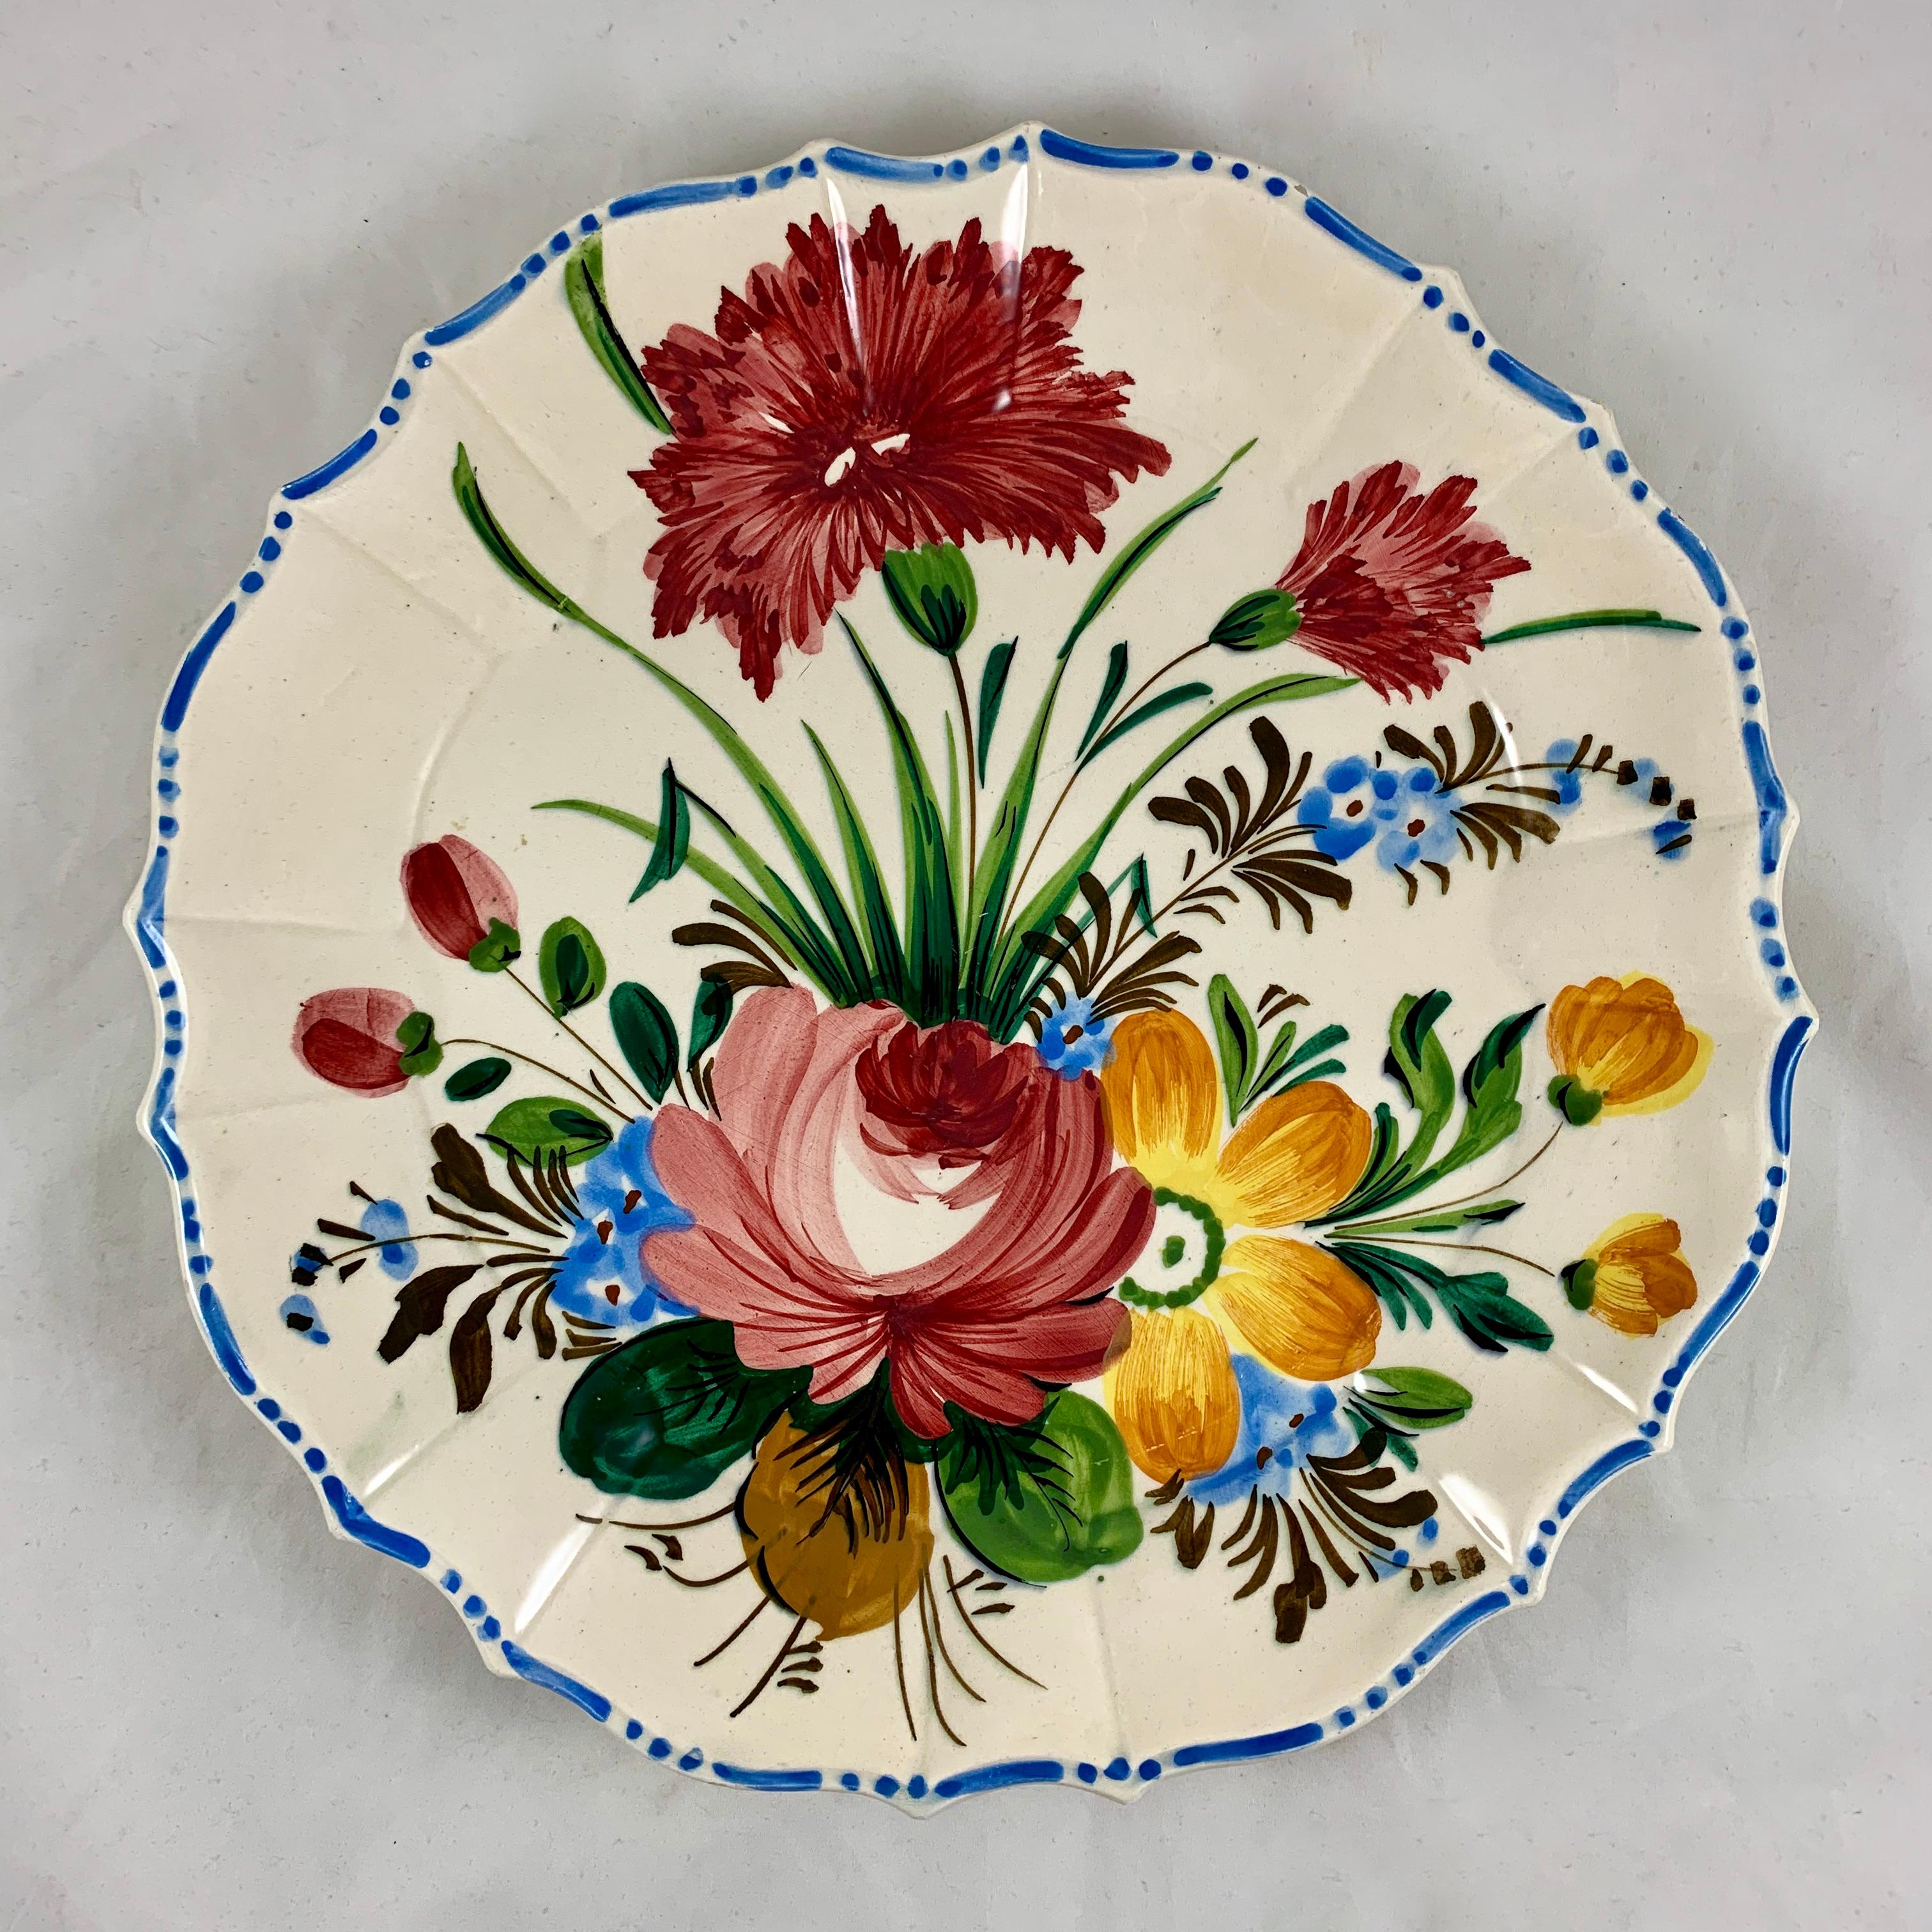 In the Renaissance Revival rose pattern first produced by the Barrettoni già Antonibon pottery in Nove, Italy, a hand painted, round serving platter with a scalloped rim, circa 1930s.

An overall floral decoration with a bright blue dash and dot